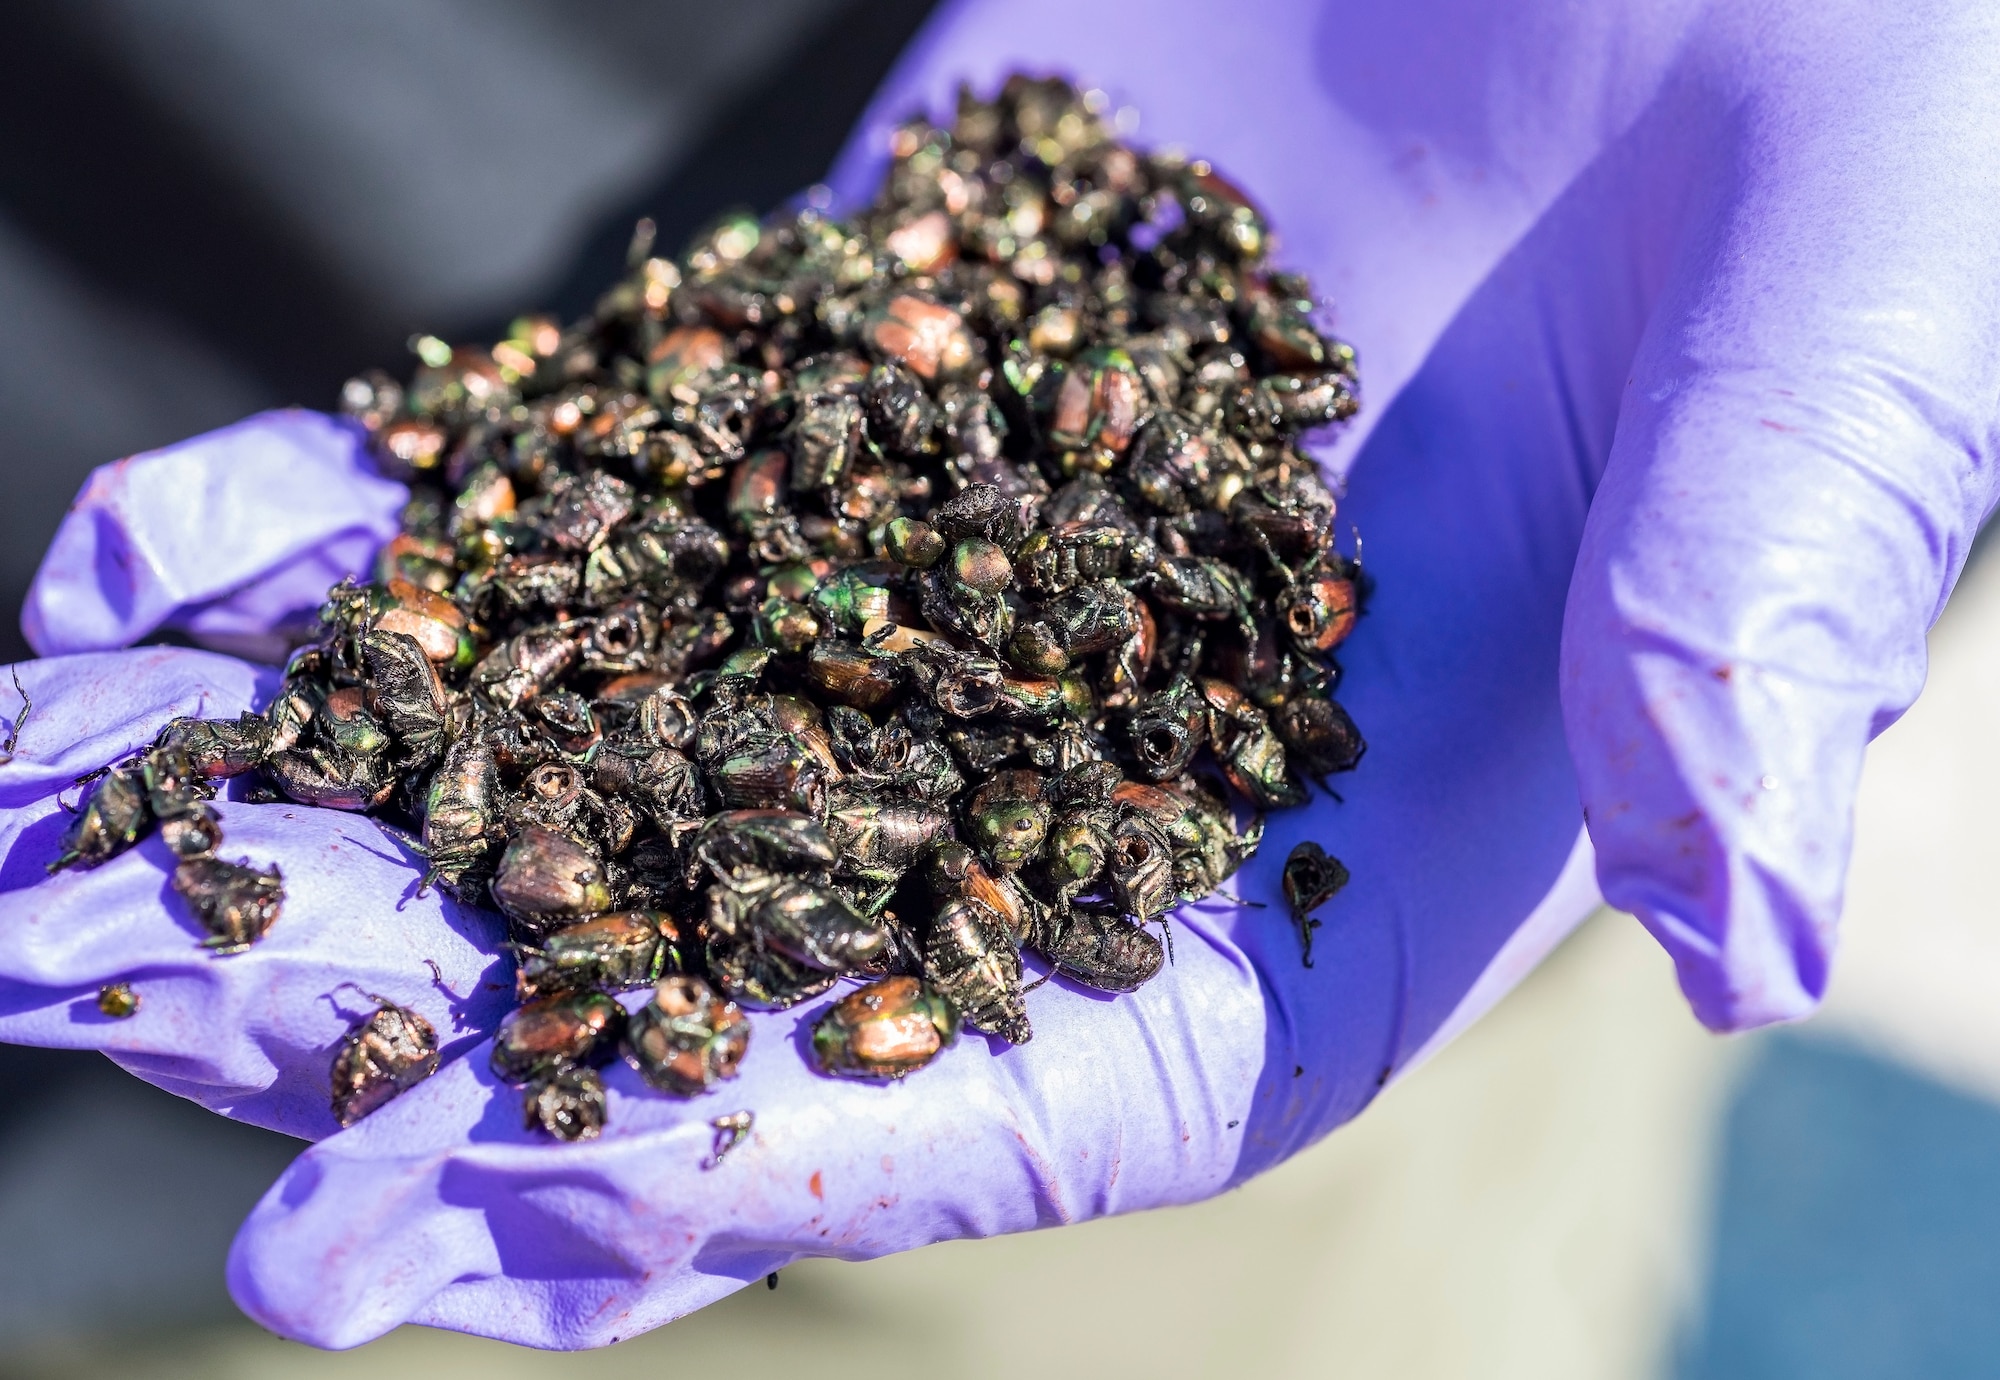 Darryl Moore, U.S. Department of Agriculture Animal and Plant Health Inspection Service Plant Protection and Quarantine representative and state plant health director, holds a handful of dead Japanese beetles Aug. 9, 2018, on Dover Air Force Base, Del. The beetles were exposed to a fungal-like pathogen to reduce the beetle population. (U.S. Air Force photo by Roland Balik)